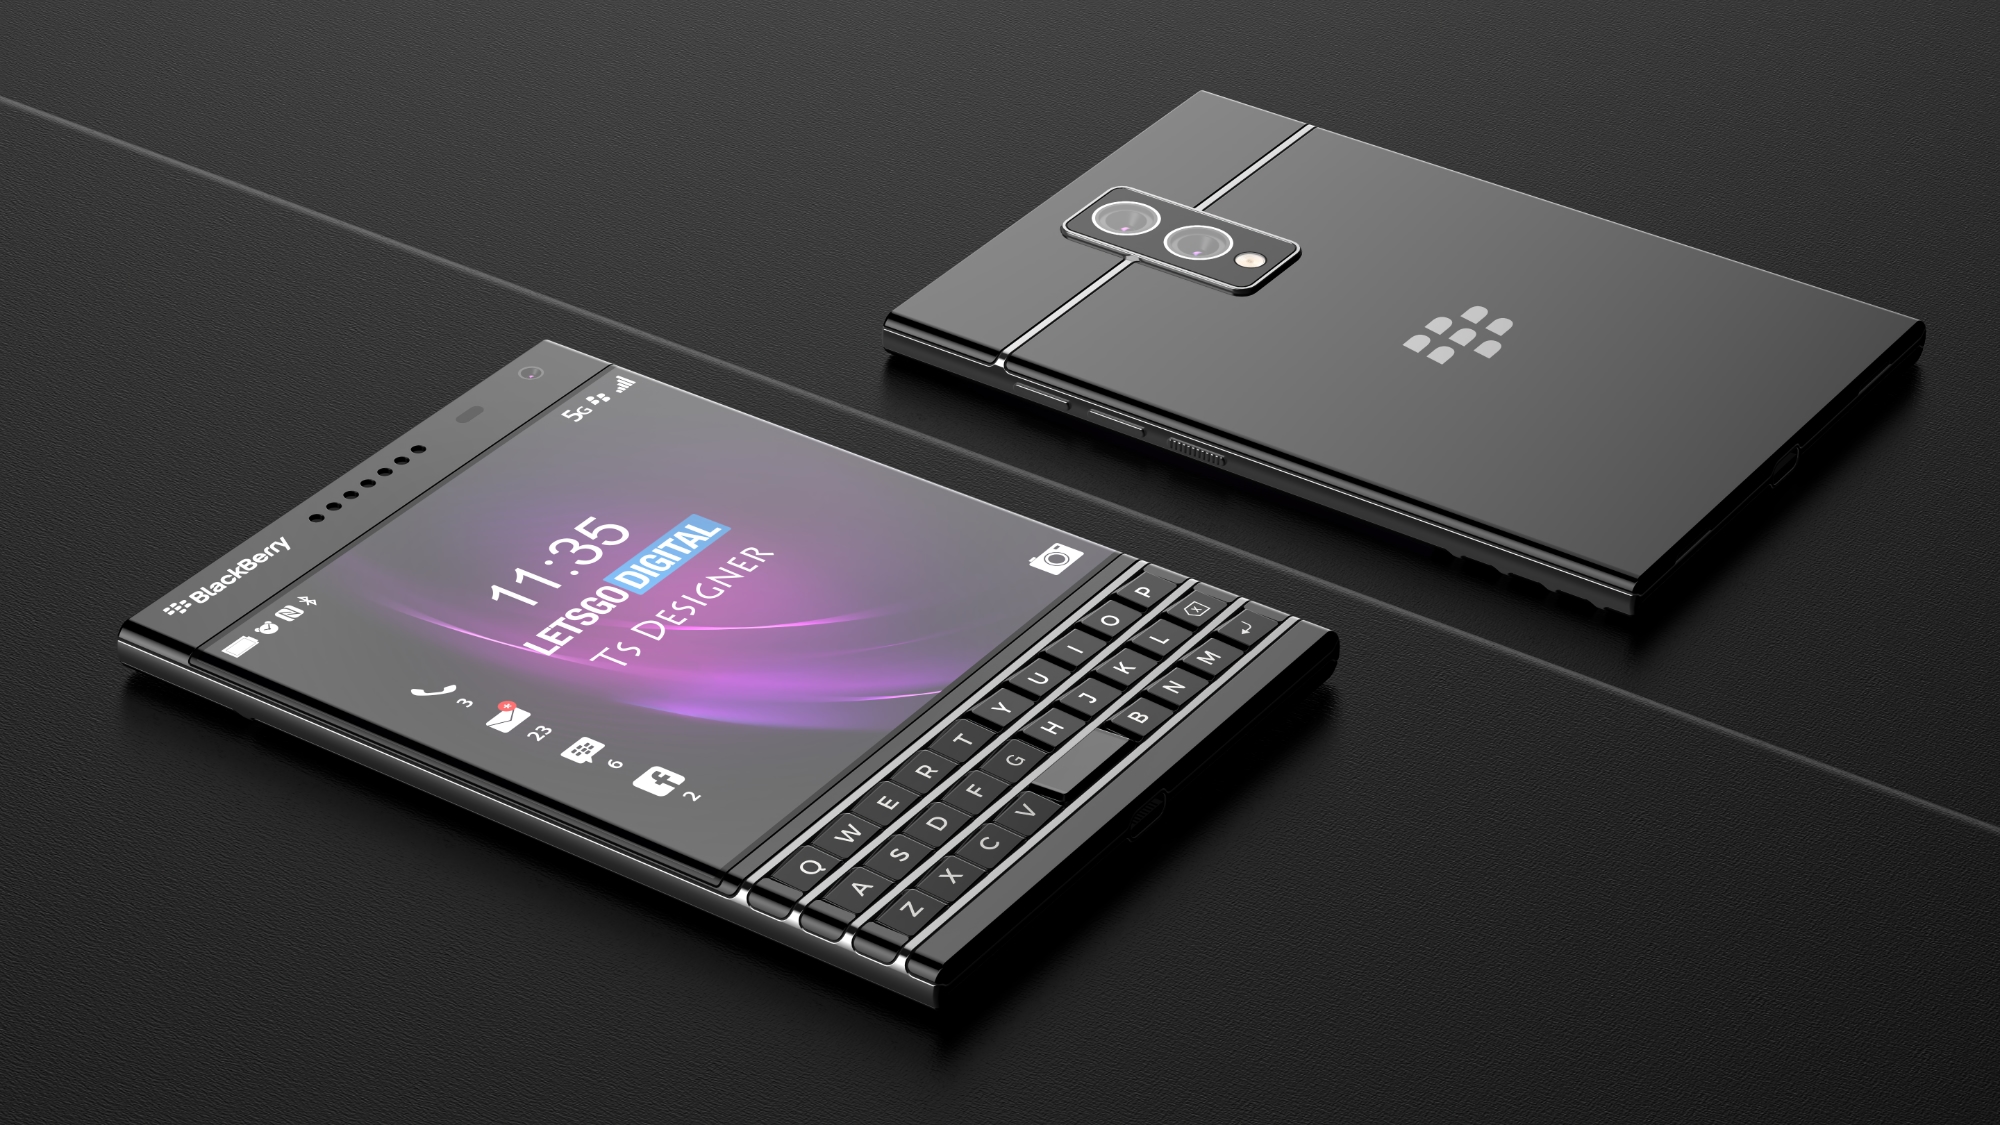 BlackBerry is preparing to release a smartphone with a physical QWERTY keyboard, here's how it might look